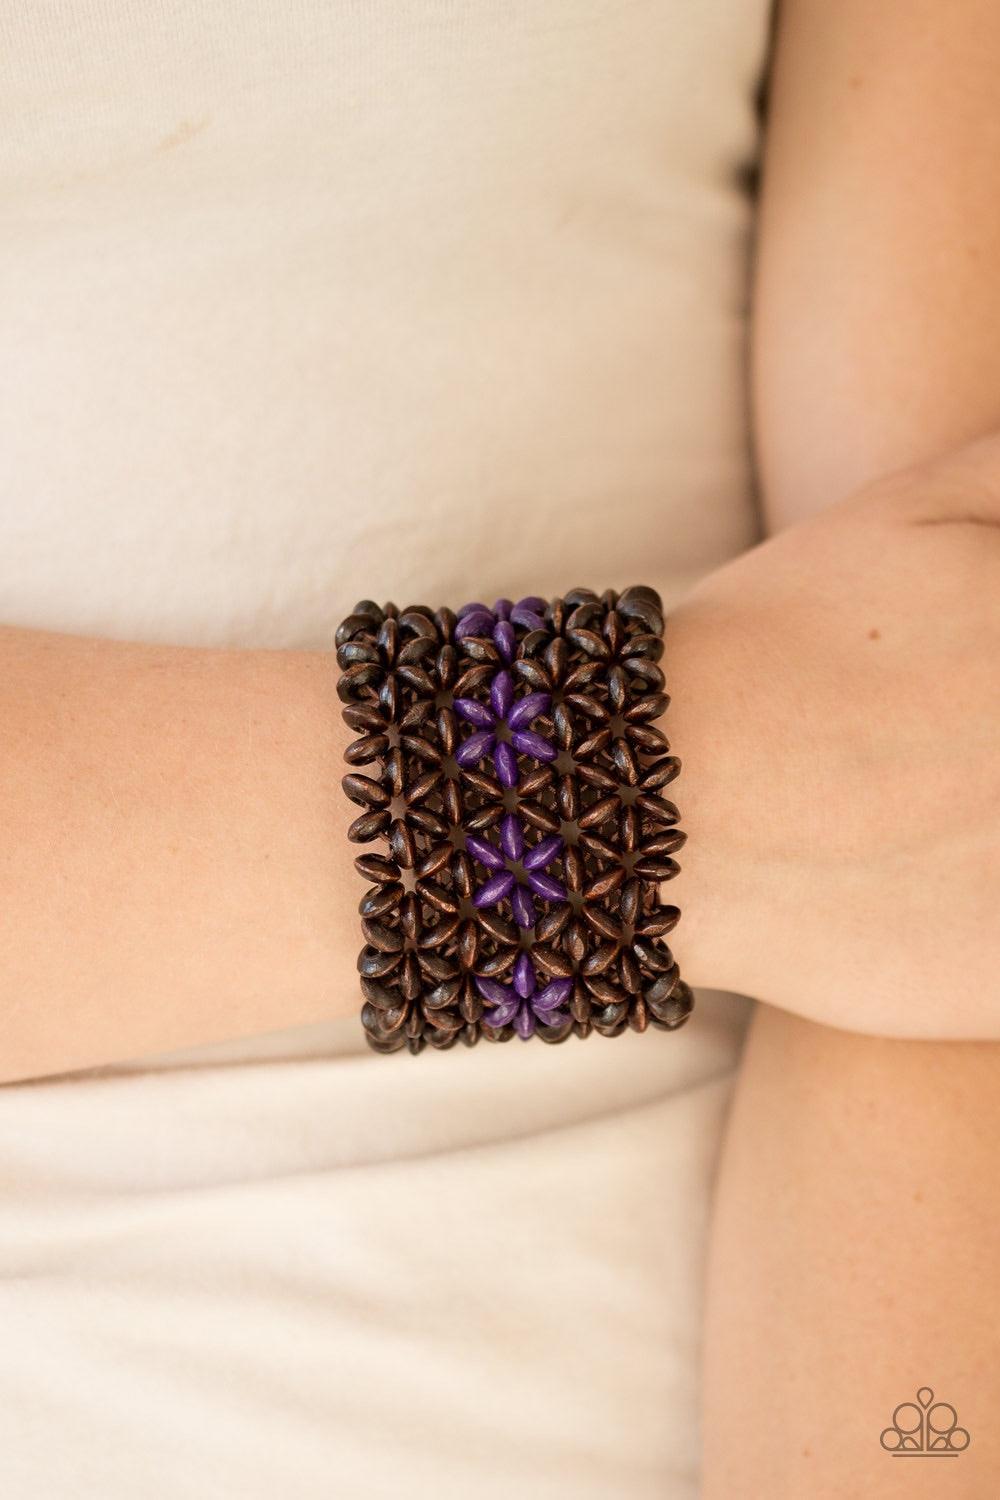 Paparazzi Accessories Bahama Babe - Purple Earthy wooden accents are threaded along elastic stretchy bands, creating an ornate bracelet. Tinted in a vivacious finish, purple wooden beads gather down the center, creating summery floral accents for a colorf